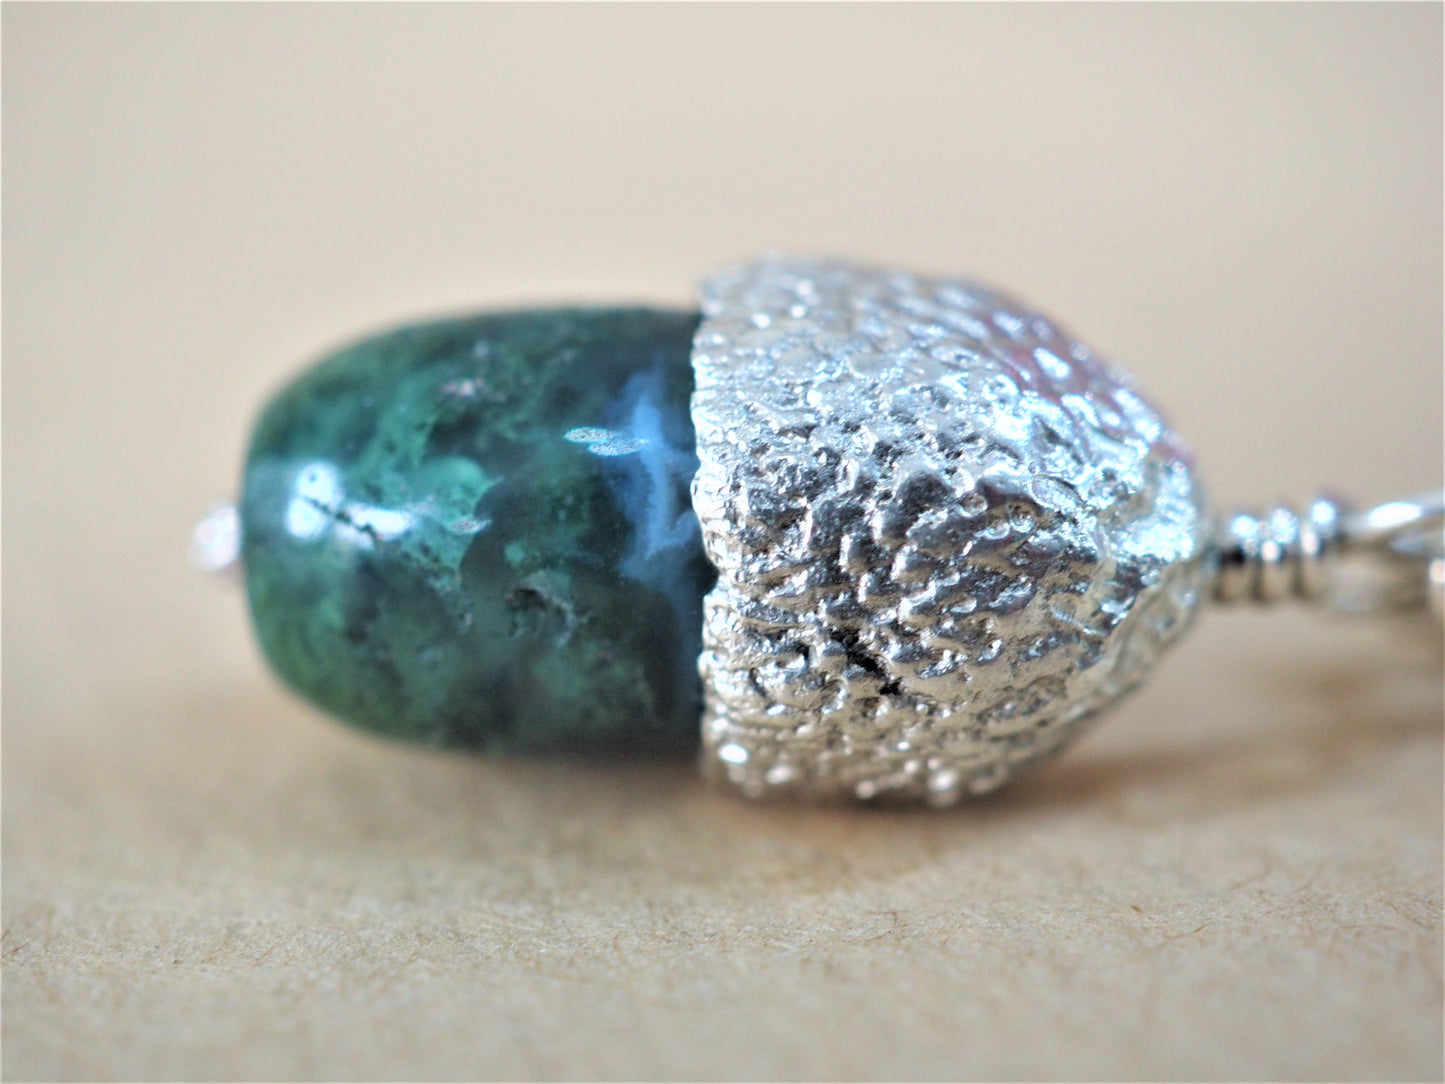 High, Charlie - Moss Agate and Silver Acorn Pendant